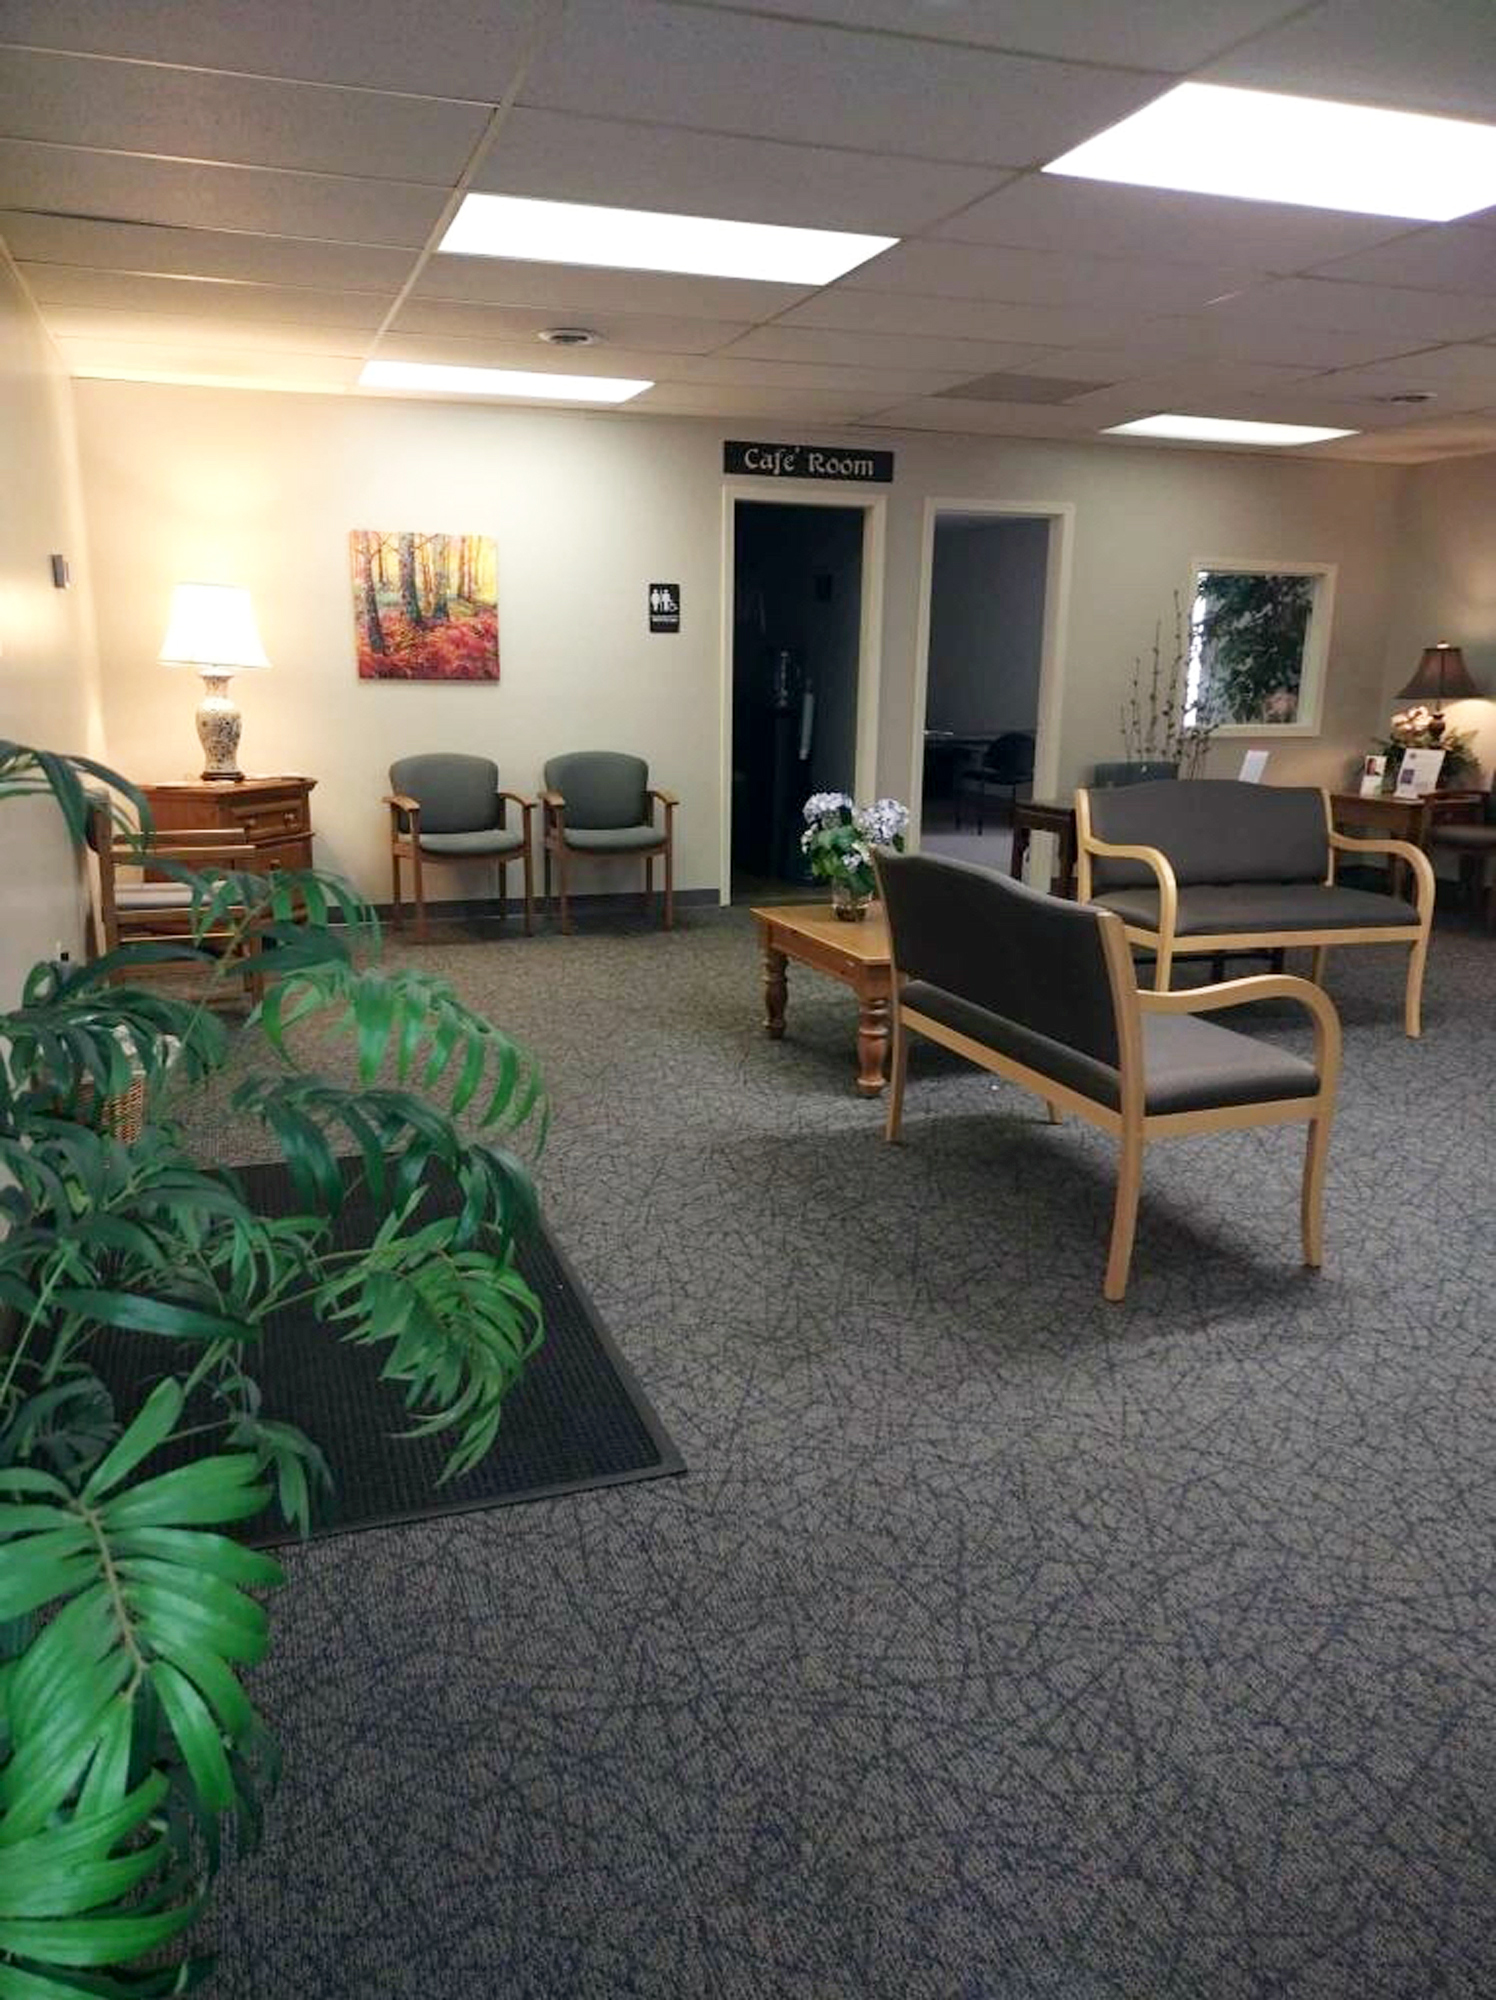 PHOTO: This image provided by Women's Med, an abortion clinic in Indianapolis, shows the clinic empty on Sept. 15, 2022, the day the state's abortion ban went into effect. 